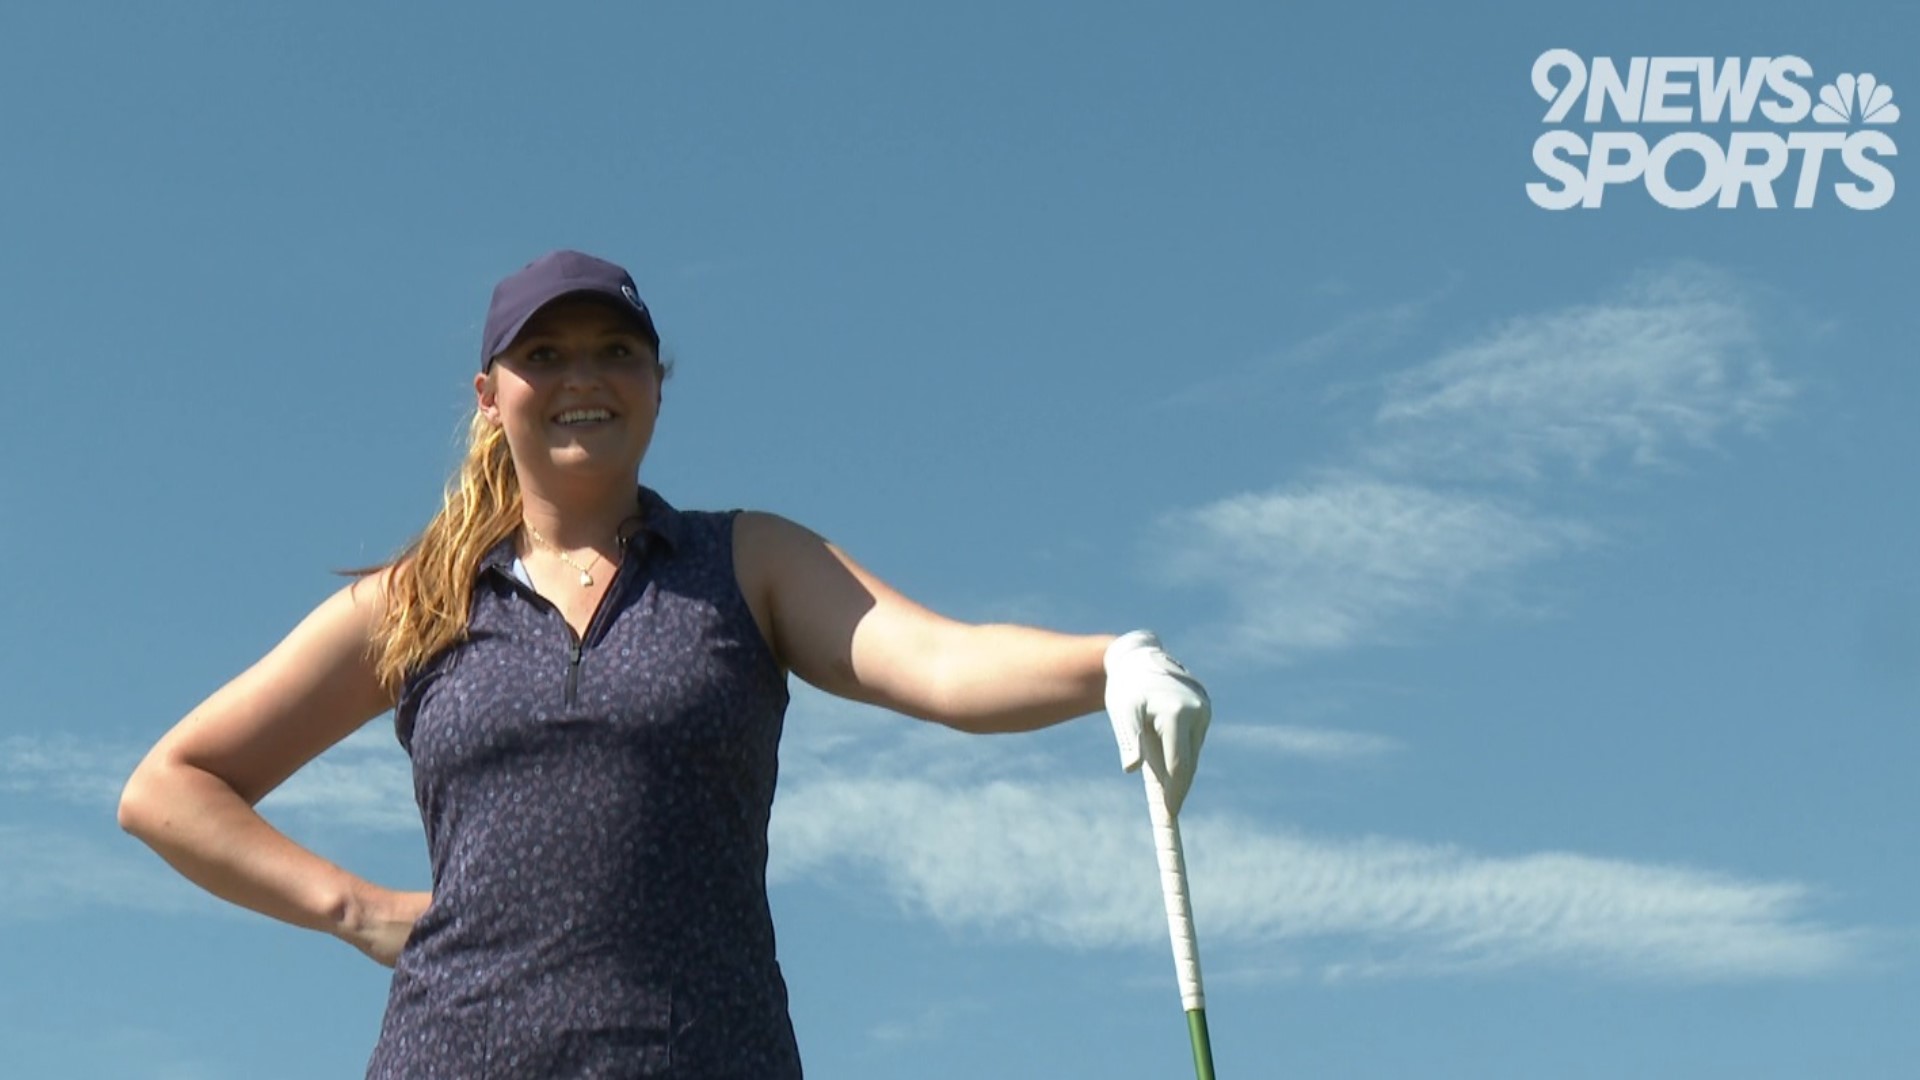 Monica Lieving leaves mark on golfs World Long Drive 9news image